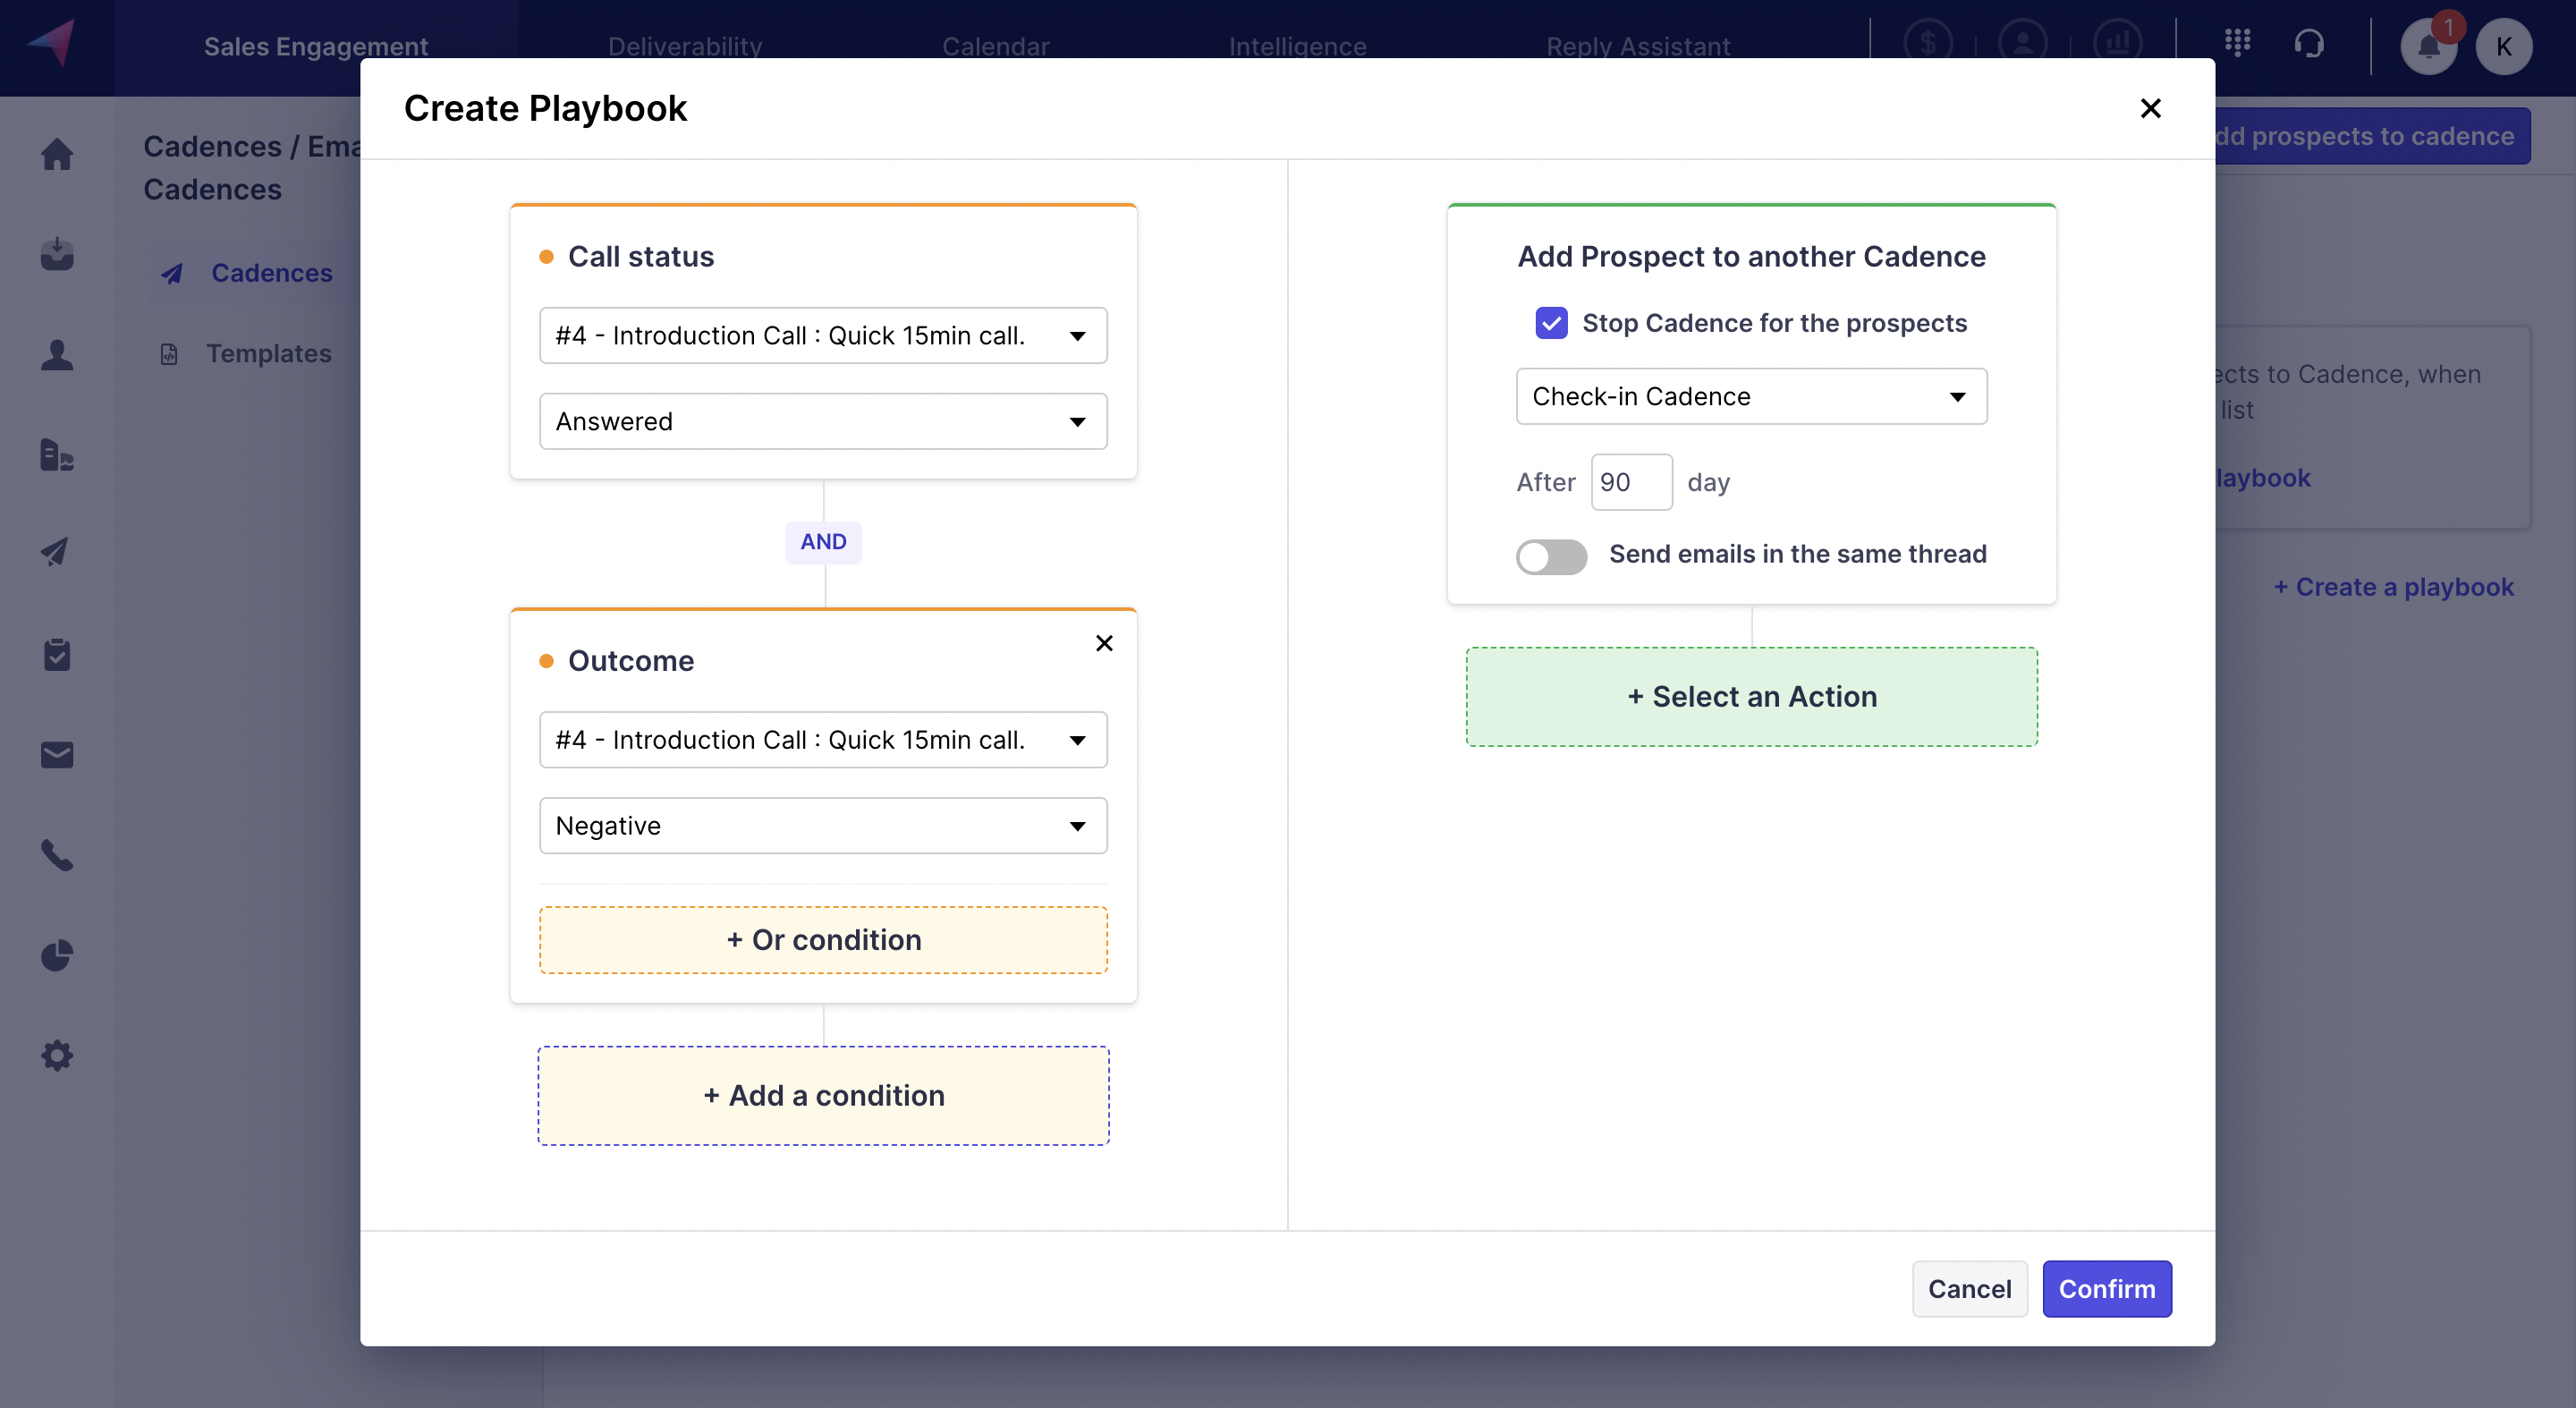 Screenshot of setting up a Playbook to switch the prospect to a “Check-in cadence".